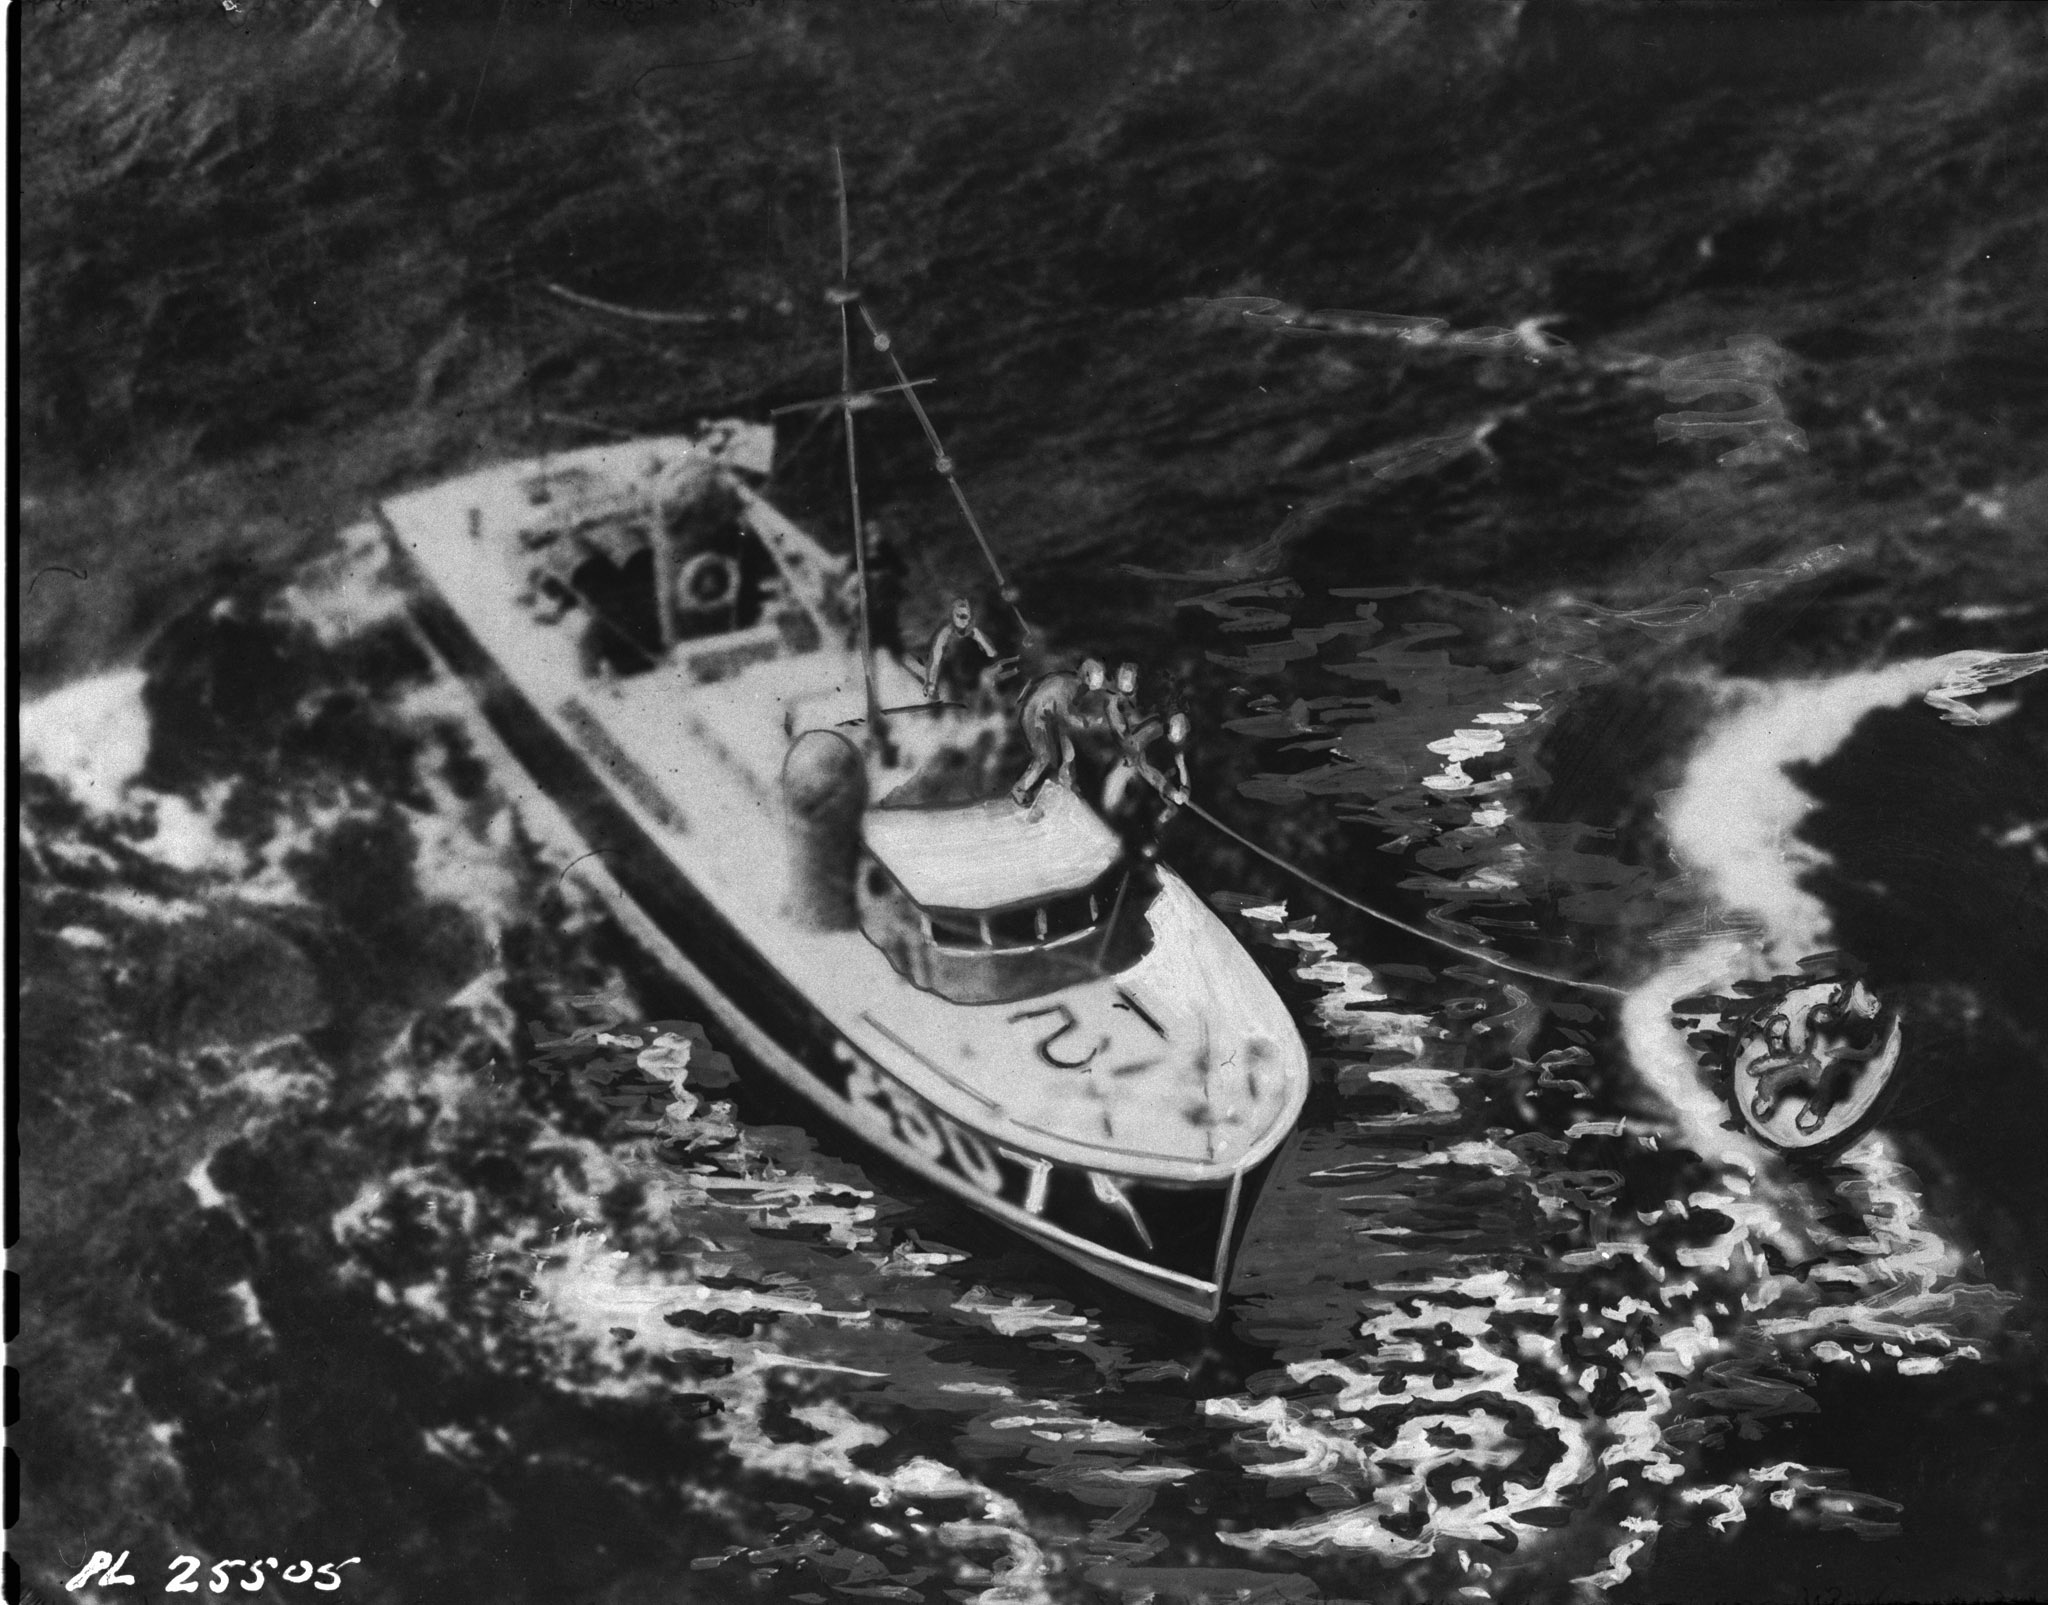 This retouched photograph shows an air-sea-rescue launch hauling to safety survivors of the Royal Canadian Air Force Canso "C for Charlie" who spent 21 hours in the stormy North Atlantic after sinking a German submarine. Badly damaged by the subs guns, the burning plane, piloted by Flight Lieutenant David Hornell was forced into the sea. The crew of eight could not crowd into the one serviceable rubber dinghy and took turns clinging to the side. Sergeant Donald Scott and Sergeant Fernand St. Laurent died of exposure before help came. Flight Lieutenant Hornell died a few minutes after this picture was taken and was posthumously awarded the Victoria Cross. Other members of the crew, all of whom were honoured for their heroic exploit were Flying Officer Bernard Denomy, Flying Officer Graham Campbell, Flying Officer Sidney E. Matheson, Flight Sergeant Israel J. Bodnoff and Flight Sergeant Sidney Cole. PHOTO: DND Archives, PL-25505